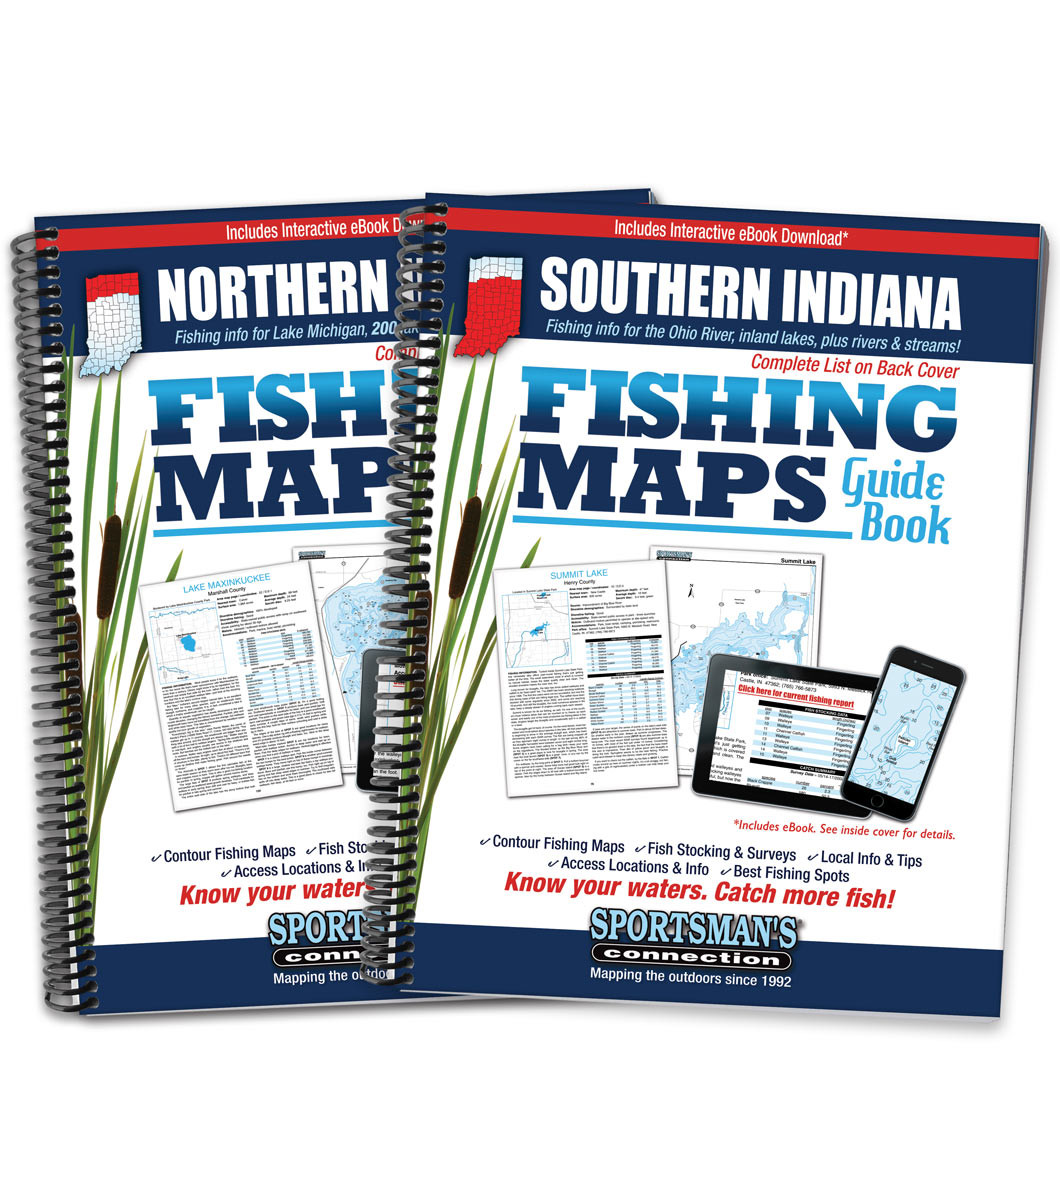 https://cdn10.bigcommerce.com/s-hdumb/products/19223/images/35549/Indiana-Fishing-Map-Guide-Print-Covers__77520.1578139974.1280.1280.jpg?c=2